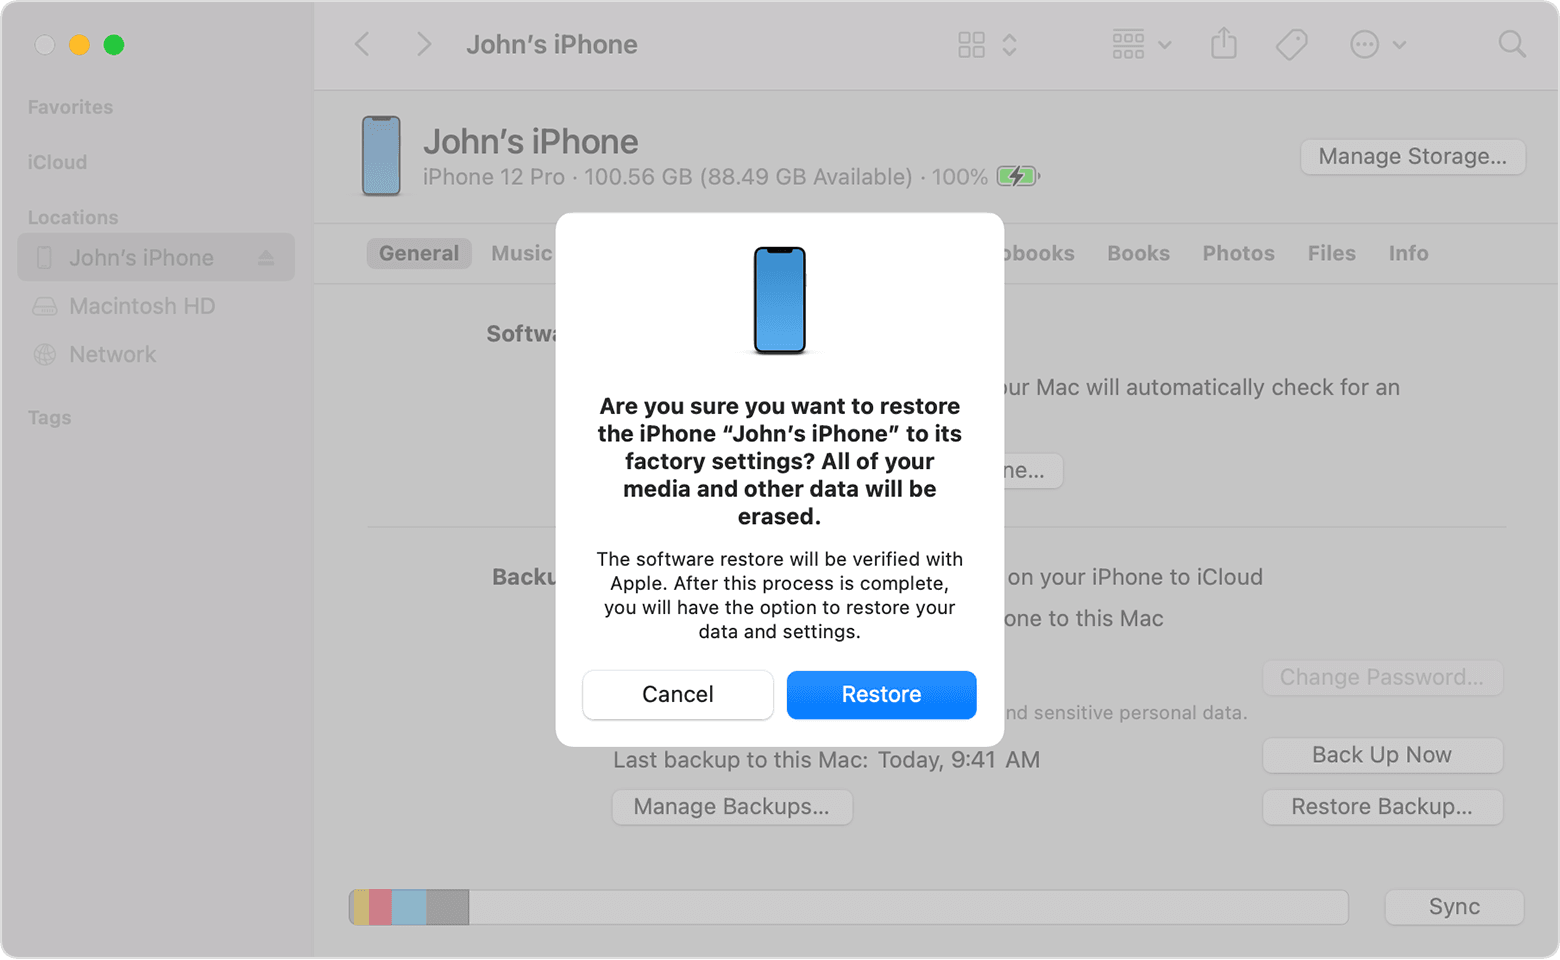 Click on "Restore iPhone".
Follow the on-screen instructions to restore your iPhone to its factory settings.